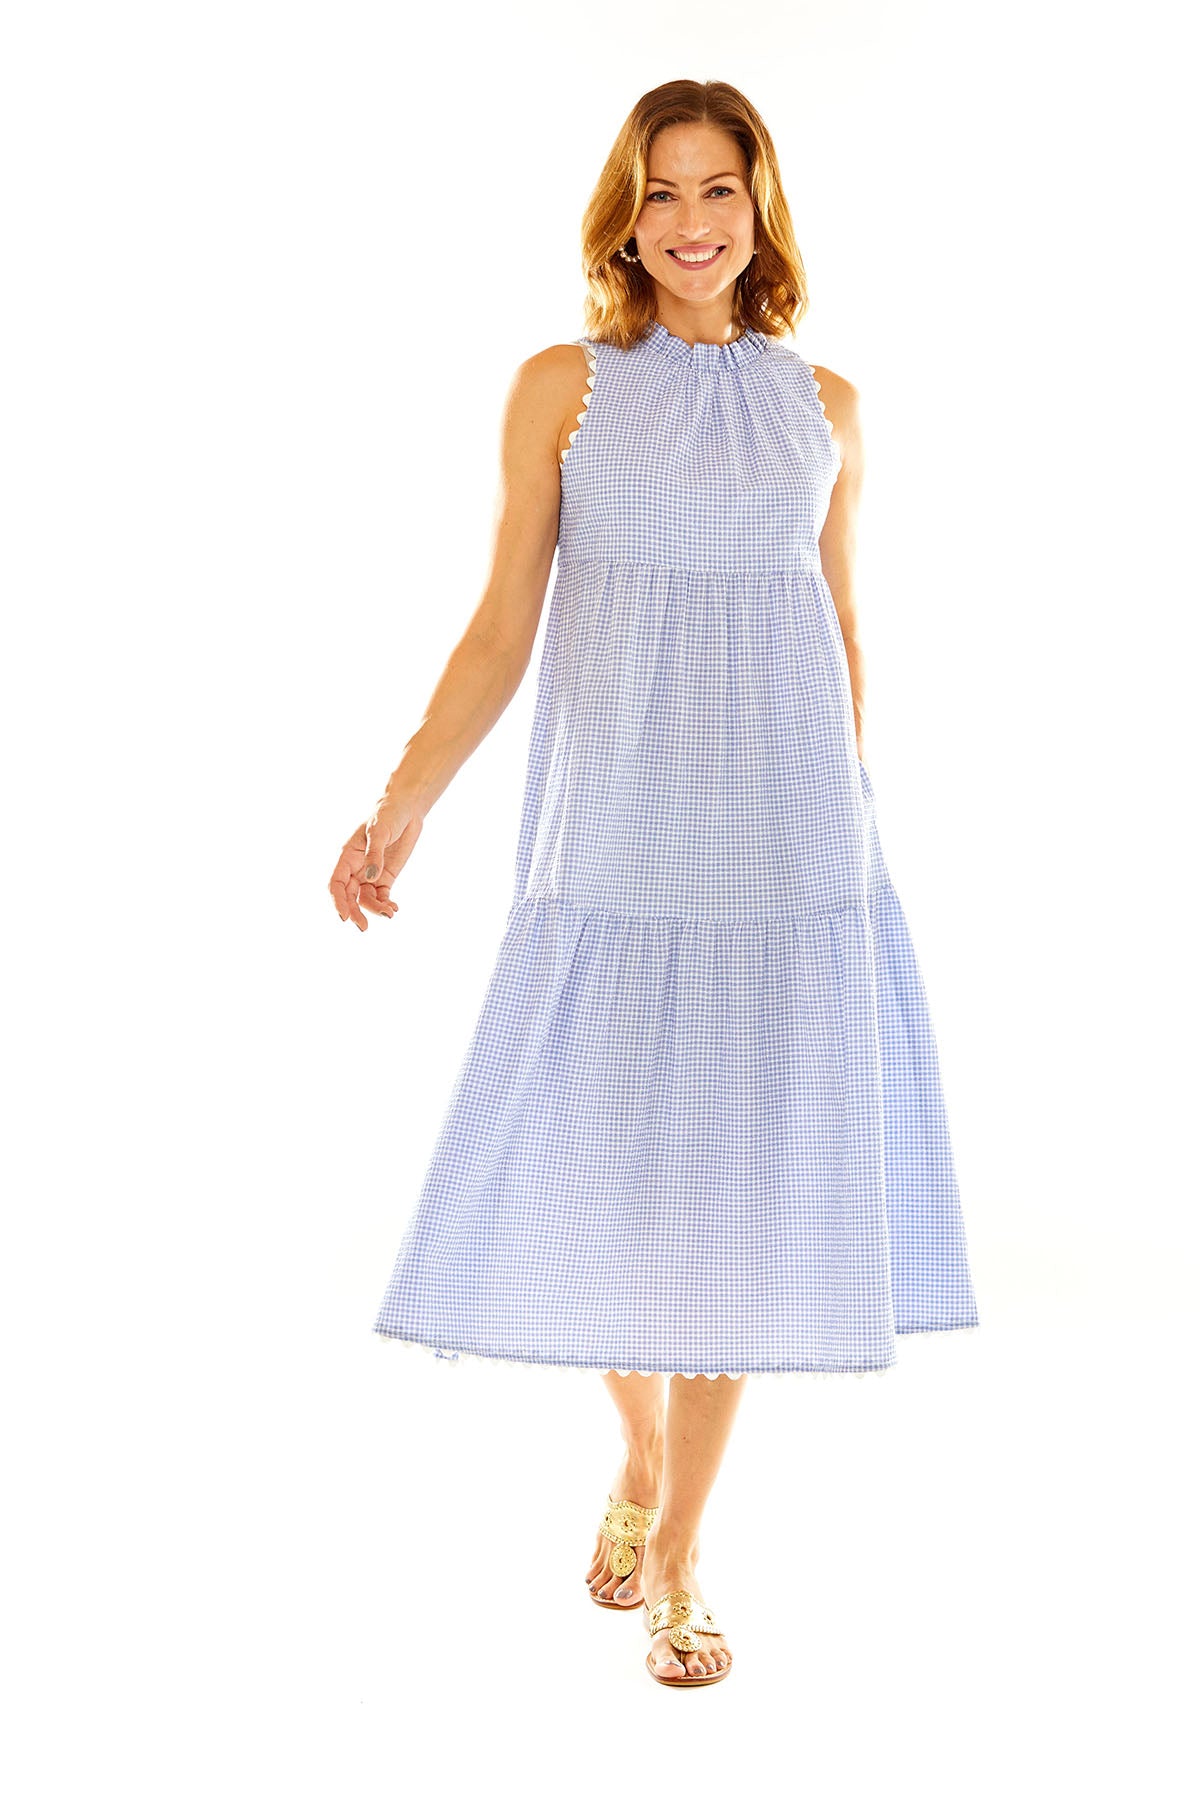 Woman in blue and white gingham midi dress